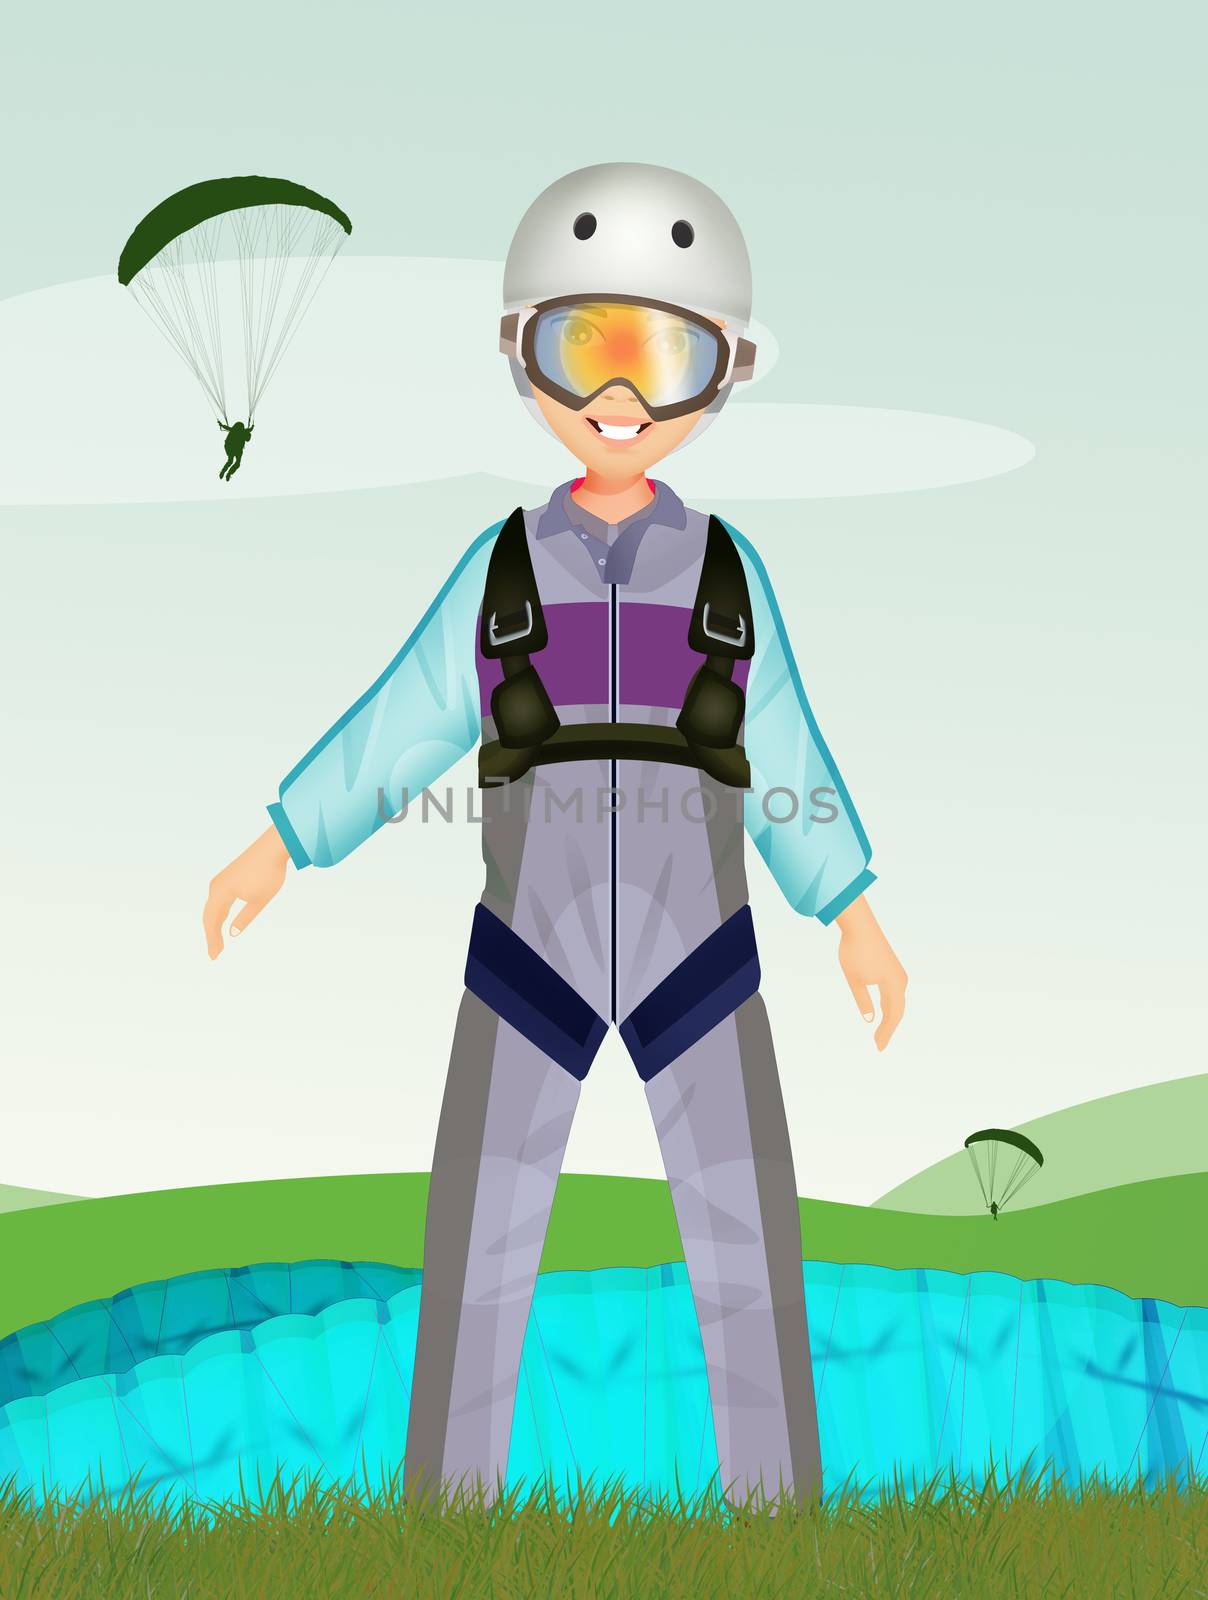 illustration of man launches with a parachute